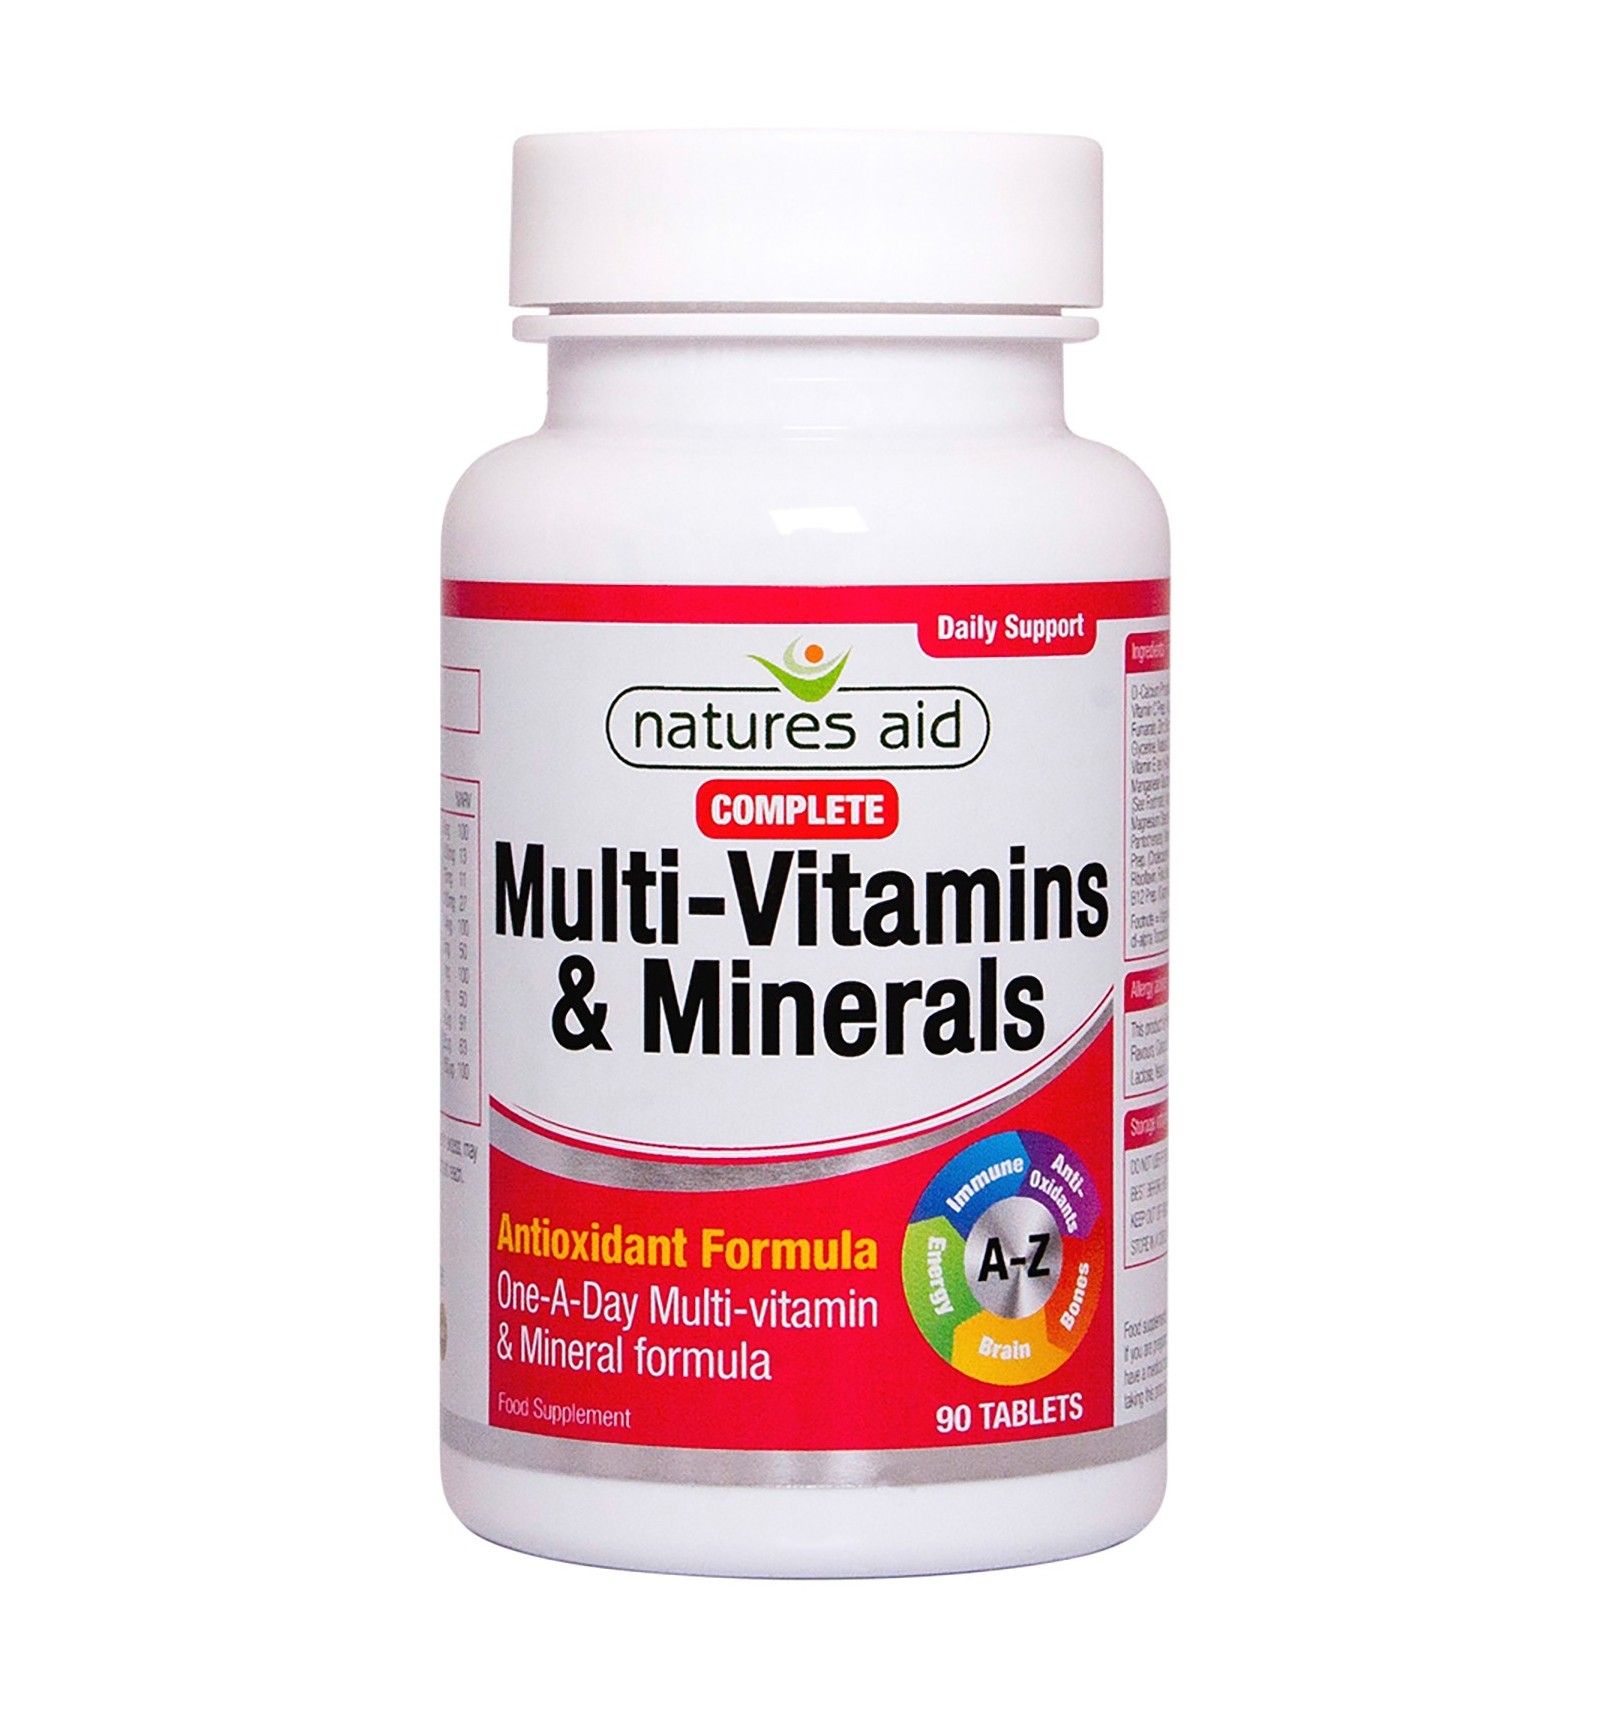 Natures Aid Complete Multi-Vitamins and Minerals - 90 Tablets